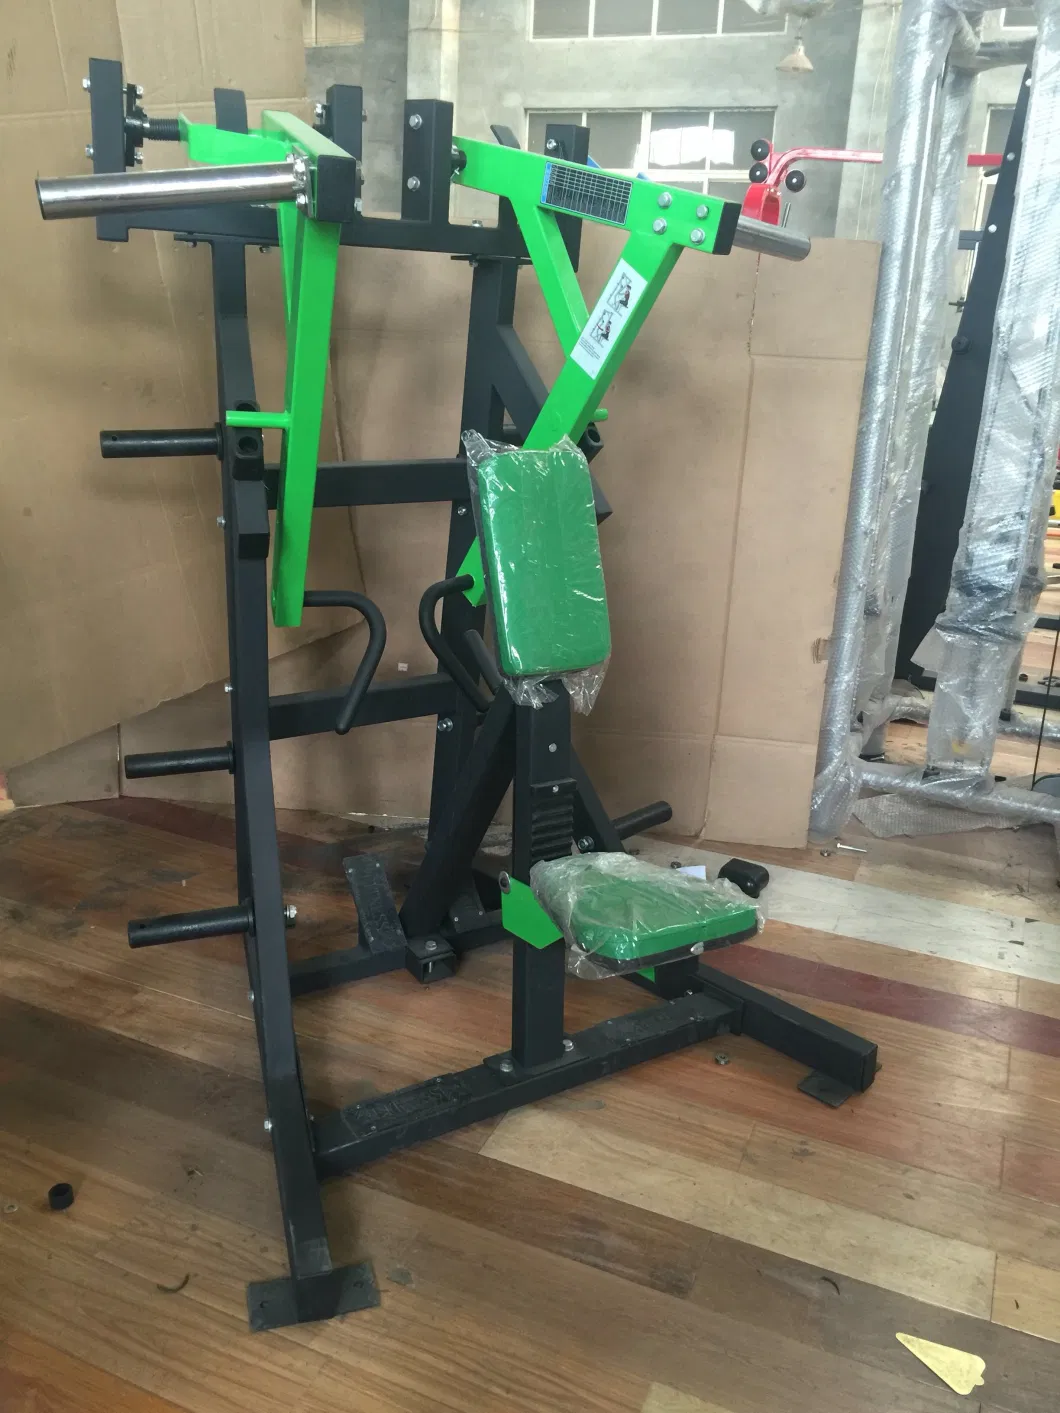 ISO-Lateral Low Row Gym Fitness Equipment Commercial